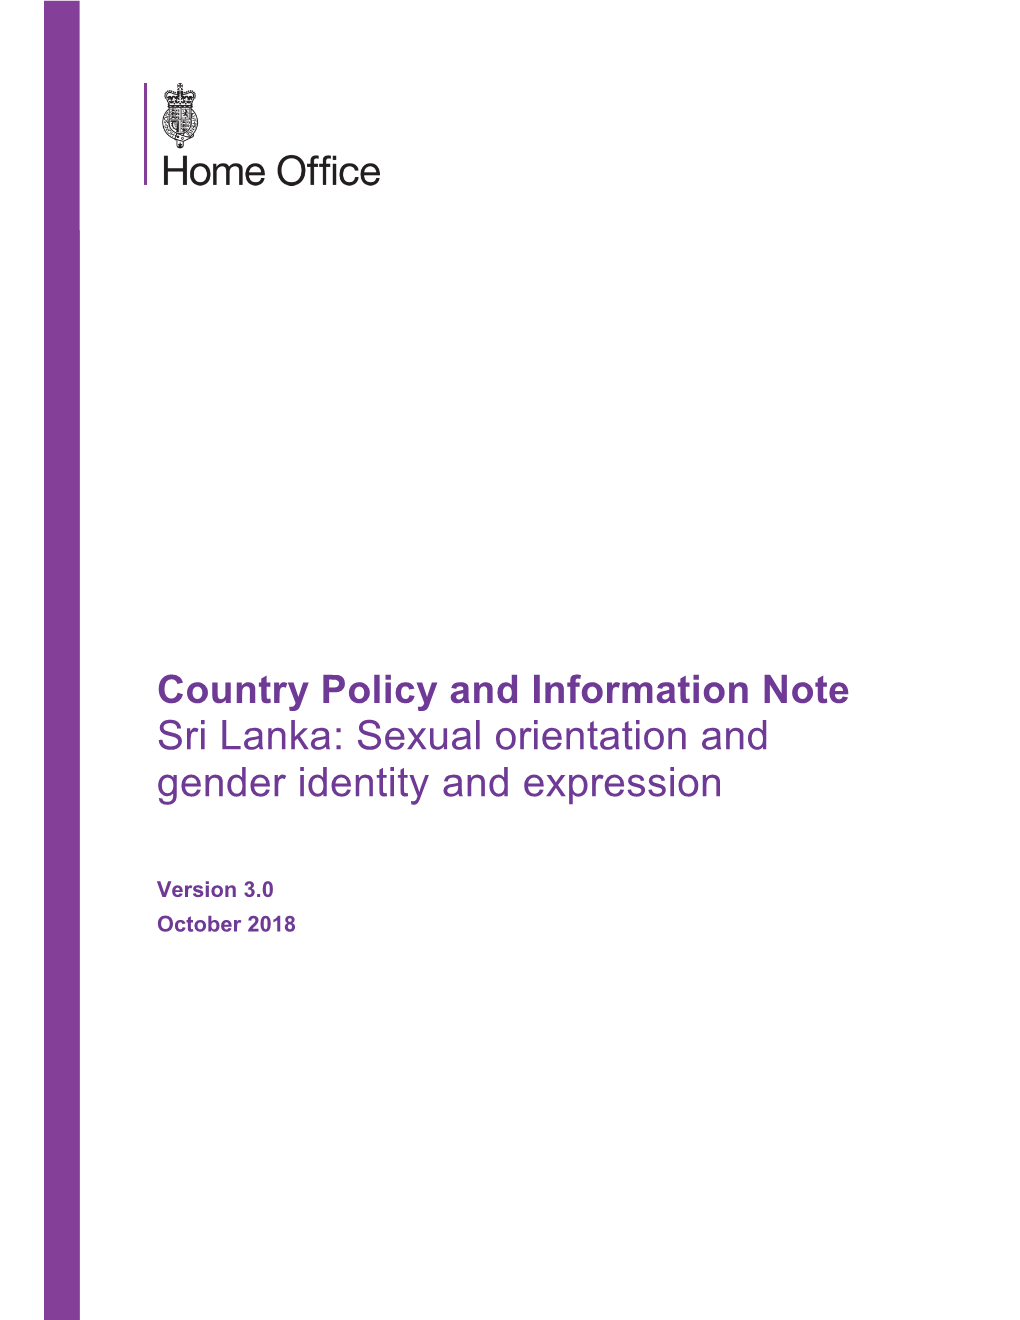 Sri Lanka: Sexual Orientation and Gender Identity and Expression